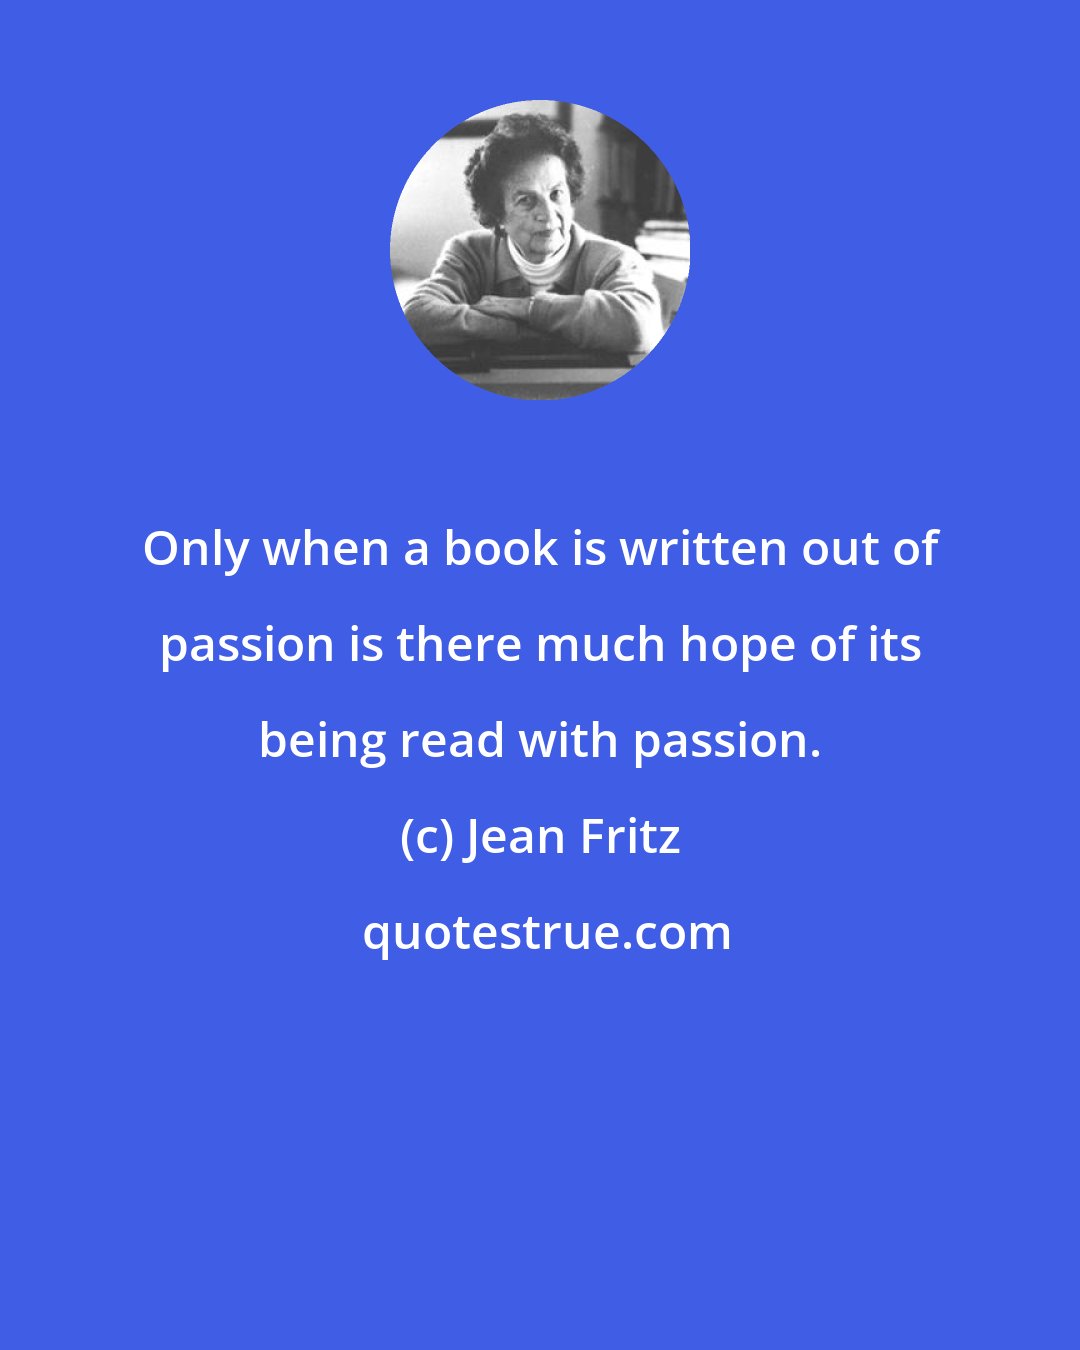 Jean Fritz: Only when a book is written out of passion is there much hope of its being read with passion.